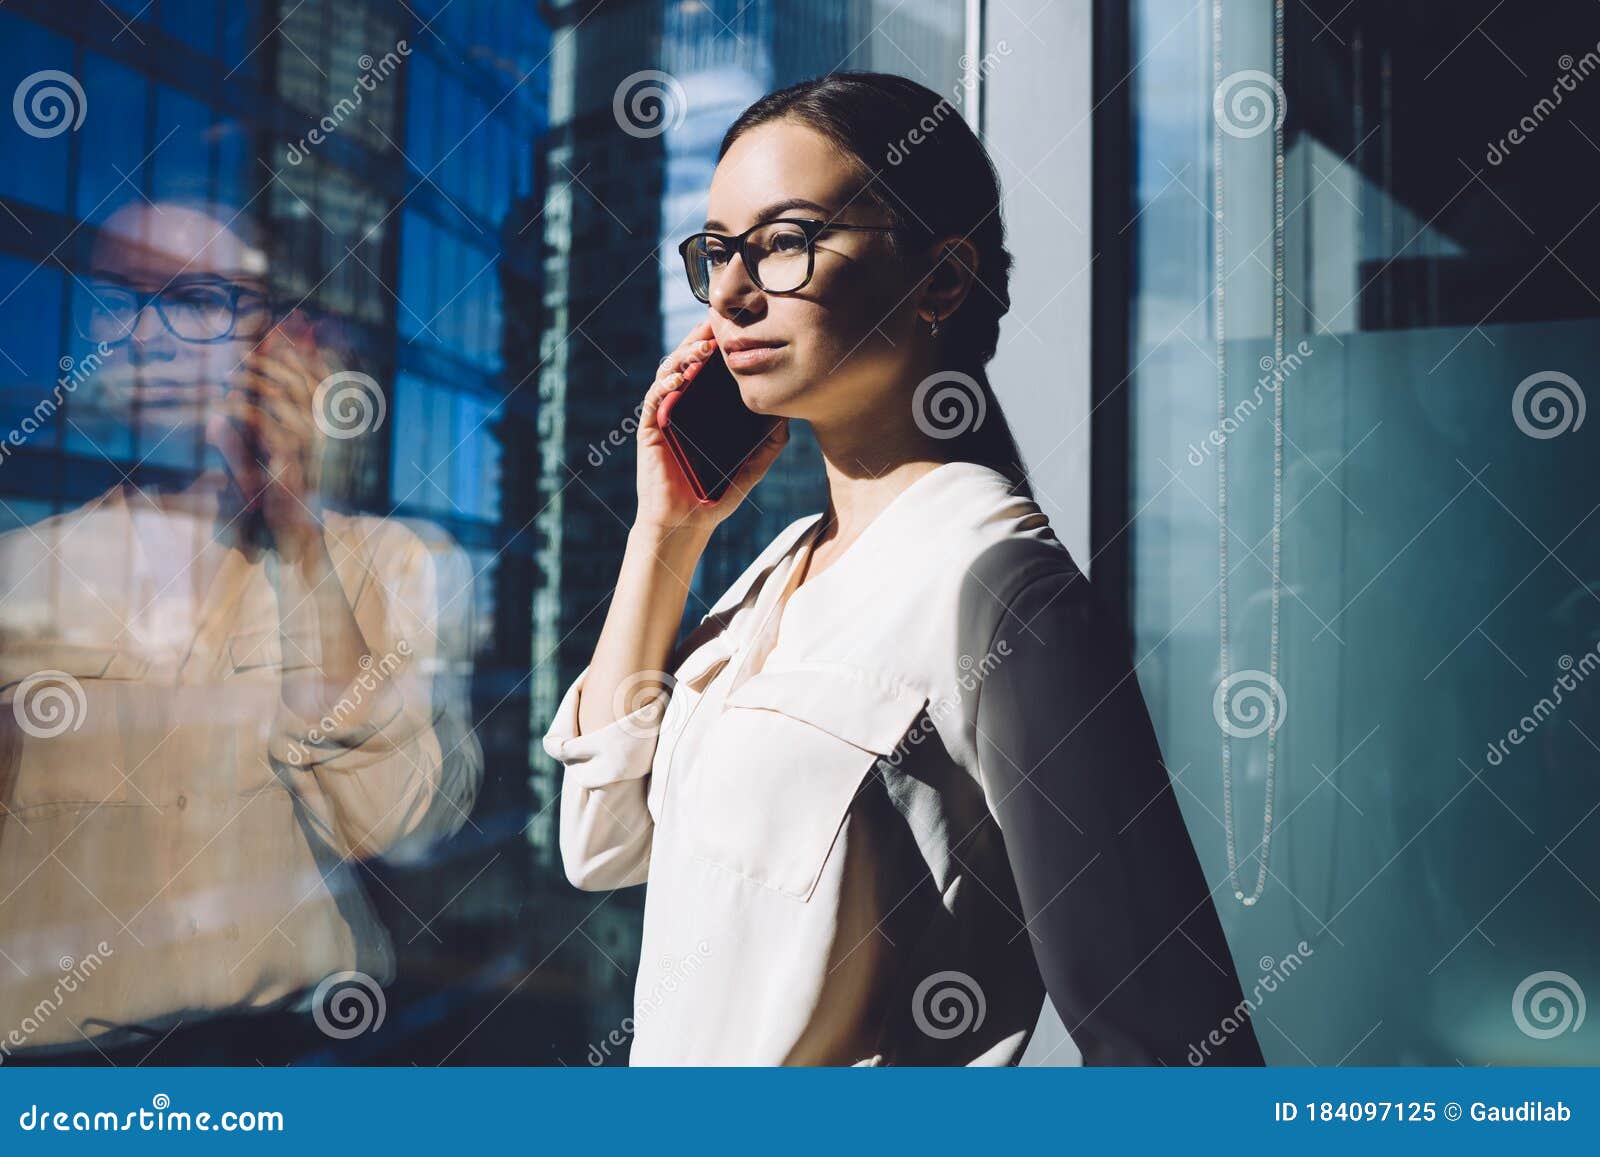 Busy Woman Calling on Cellphone in Office Stock Image - Image of ...